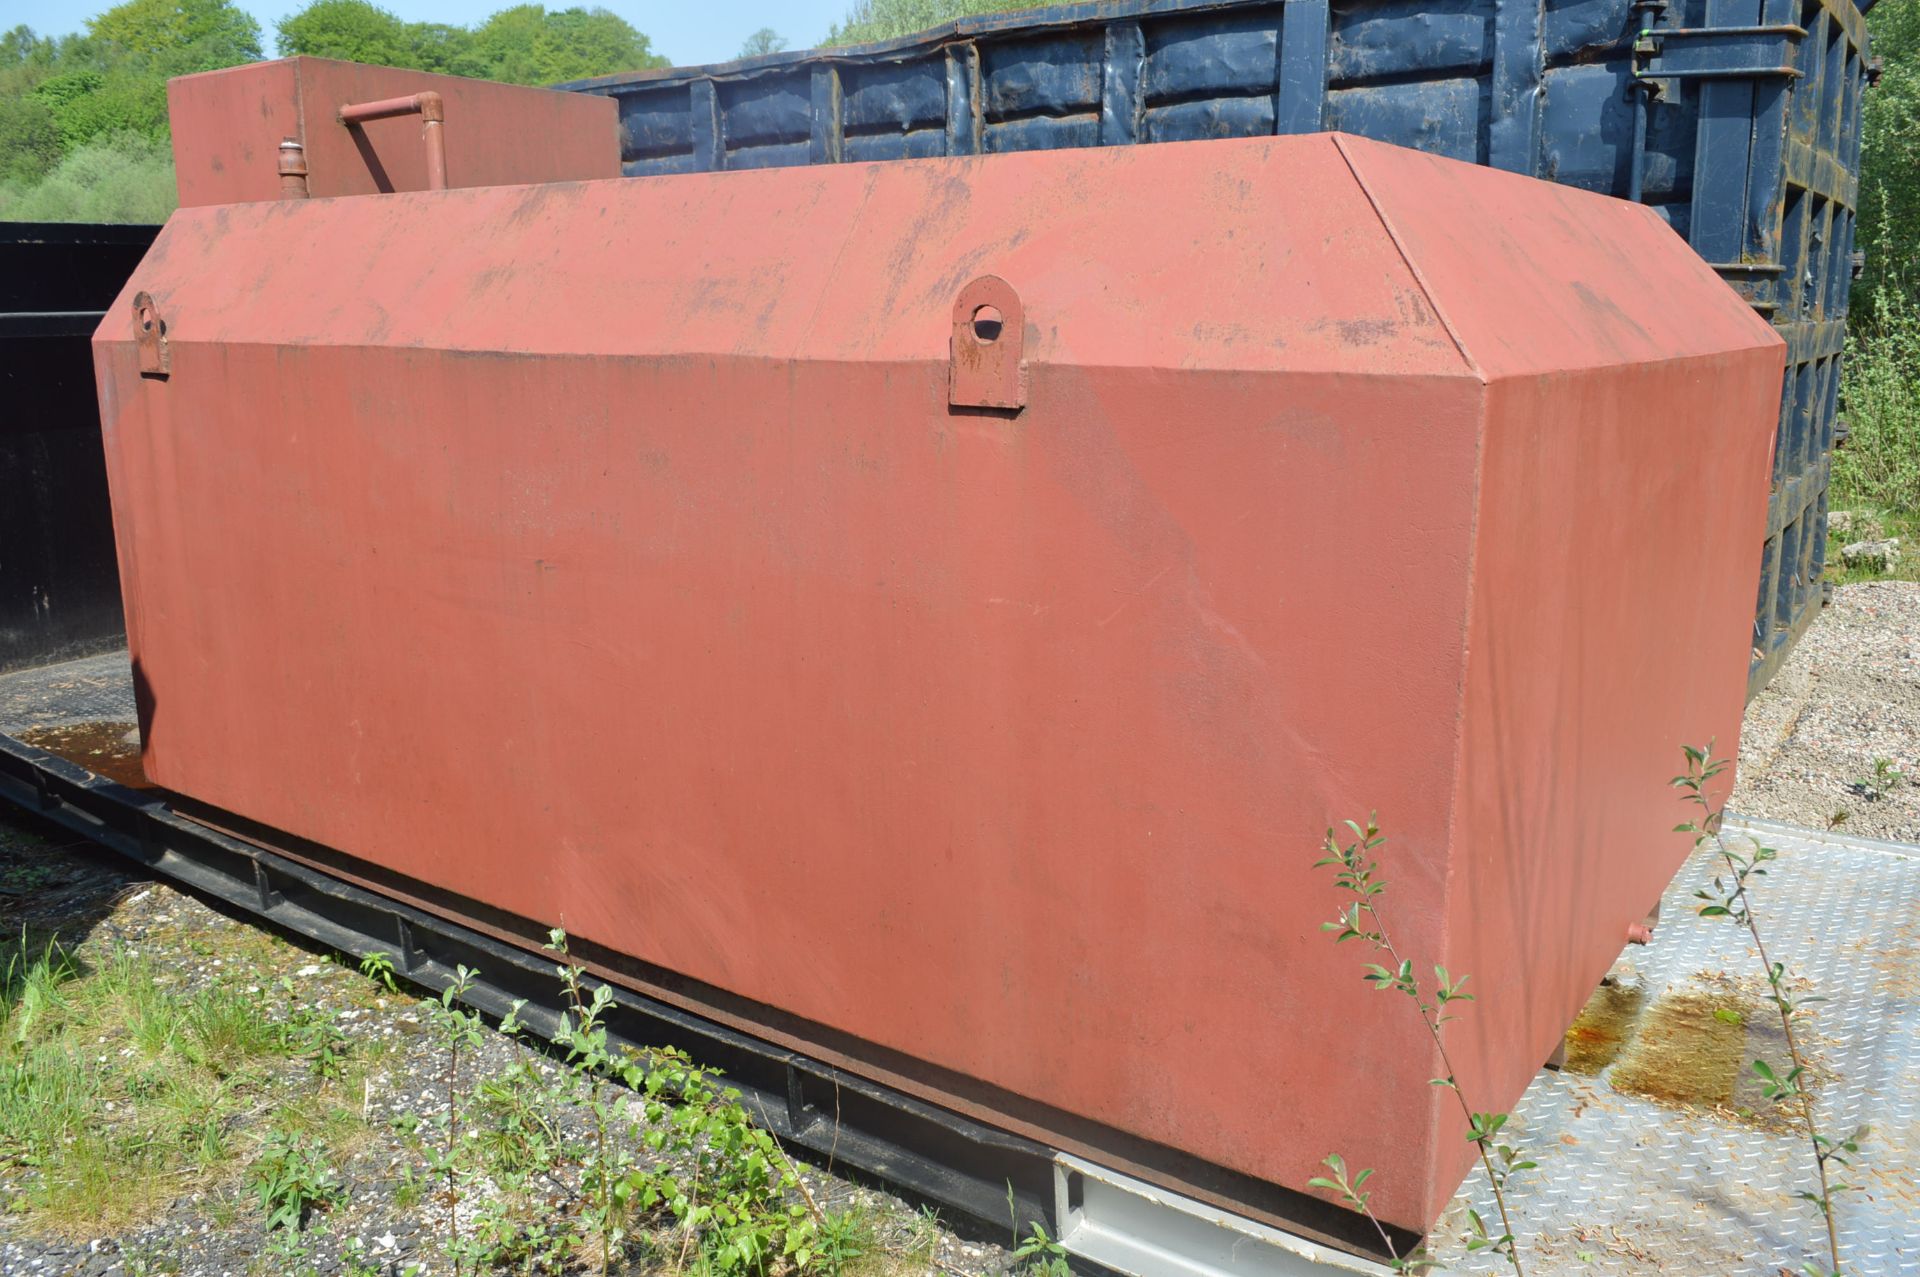 9000 litre BUNDED FUEL OIL STORAGE TANK, approx. 4.4m x 2.5m x 2m high overall, with Fueltek fuel